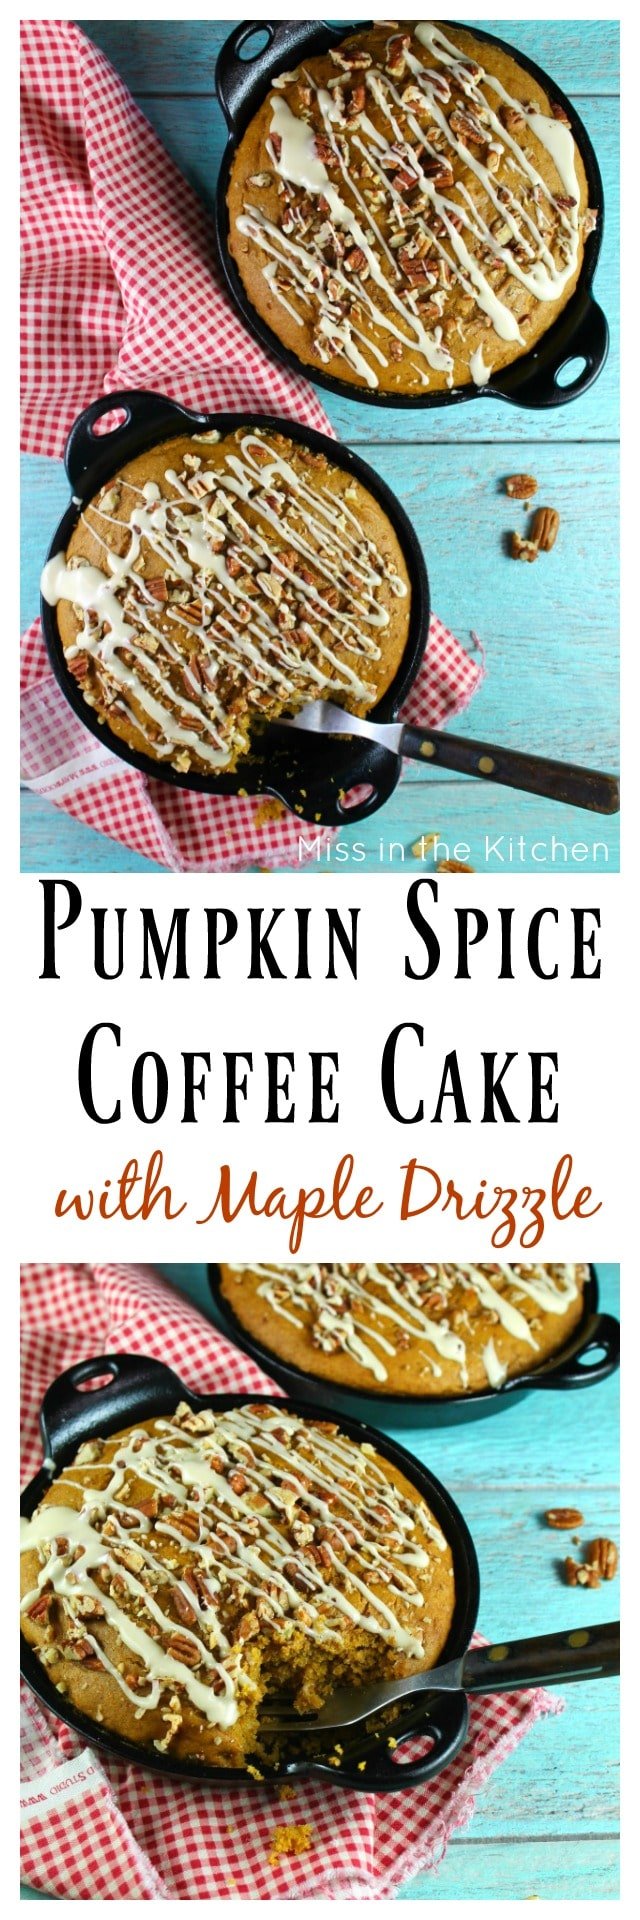 Pumpkin Spice Coffee Cake Recipe from MissintheKitchen.com Try this easy fall dessert for your next weekend brunch!